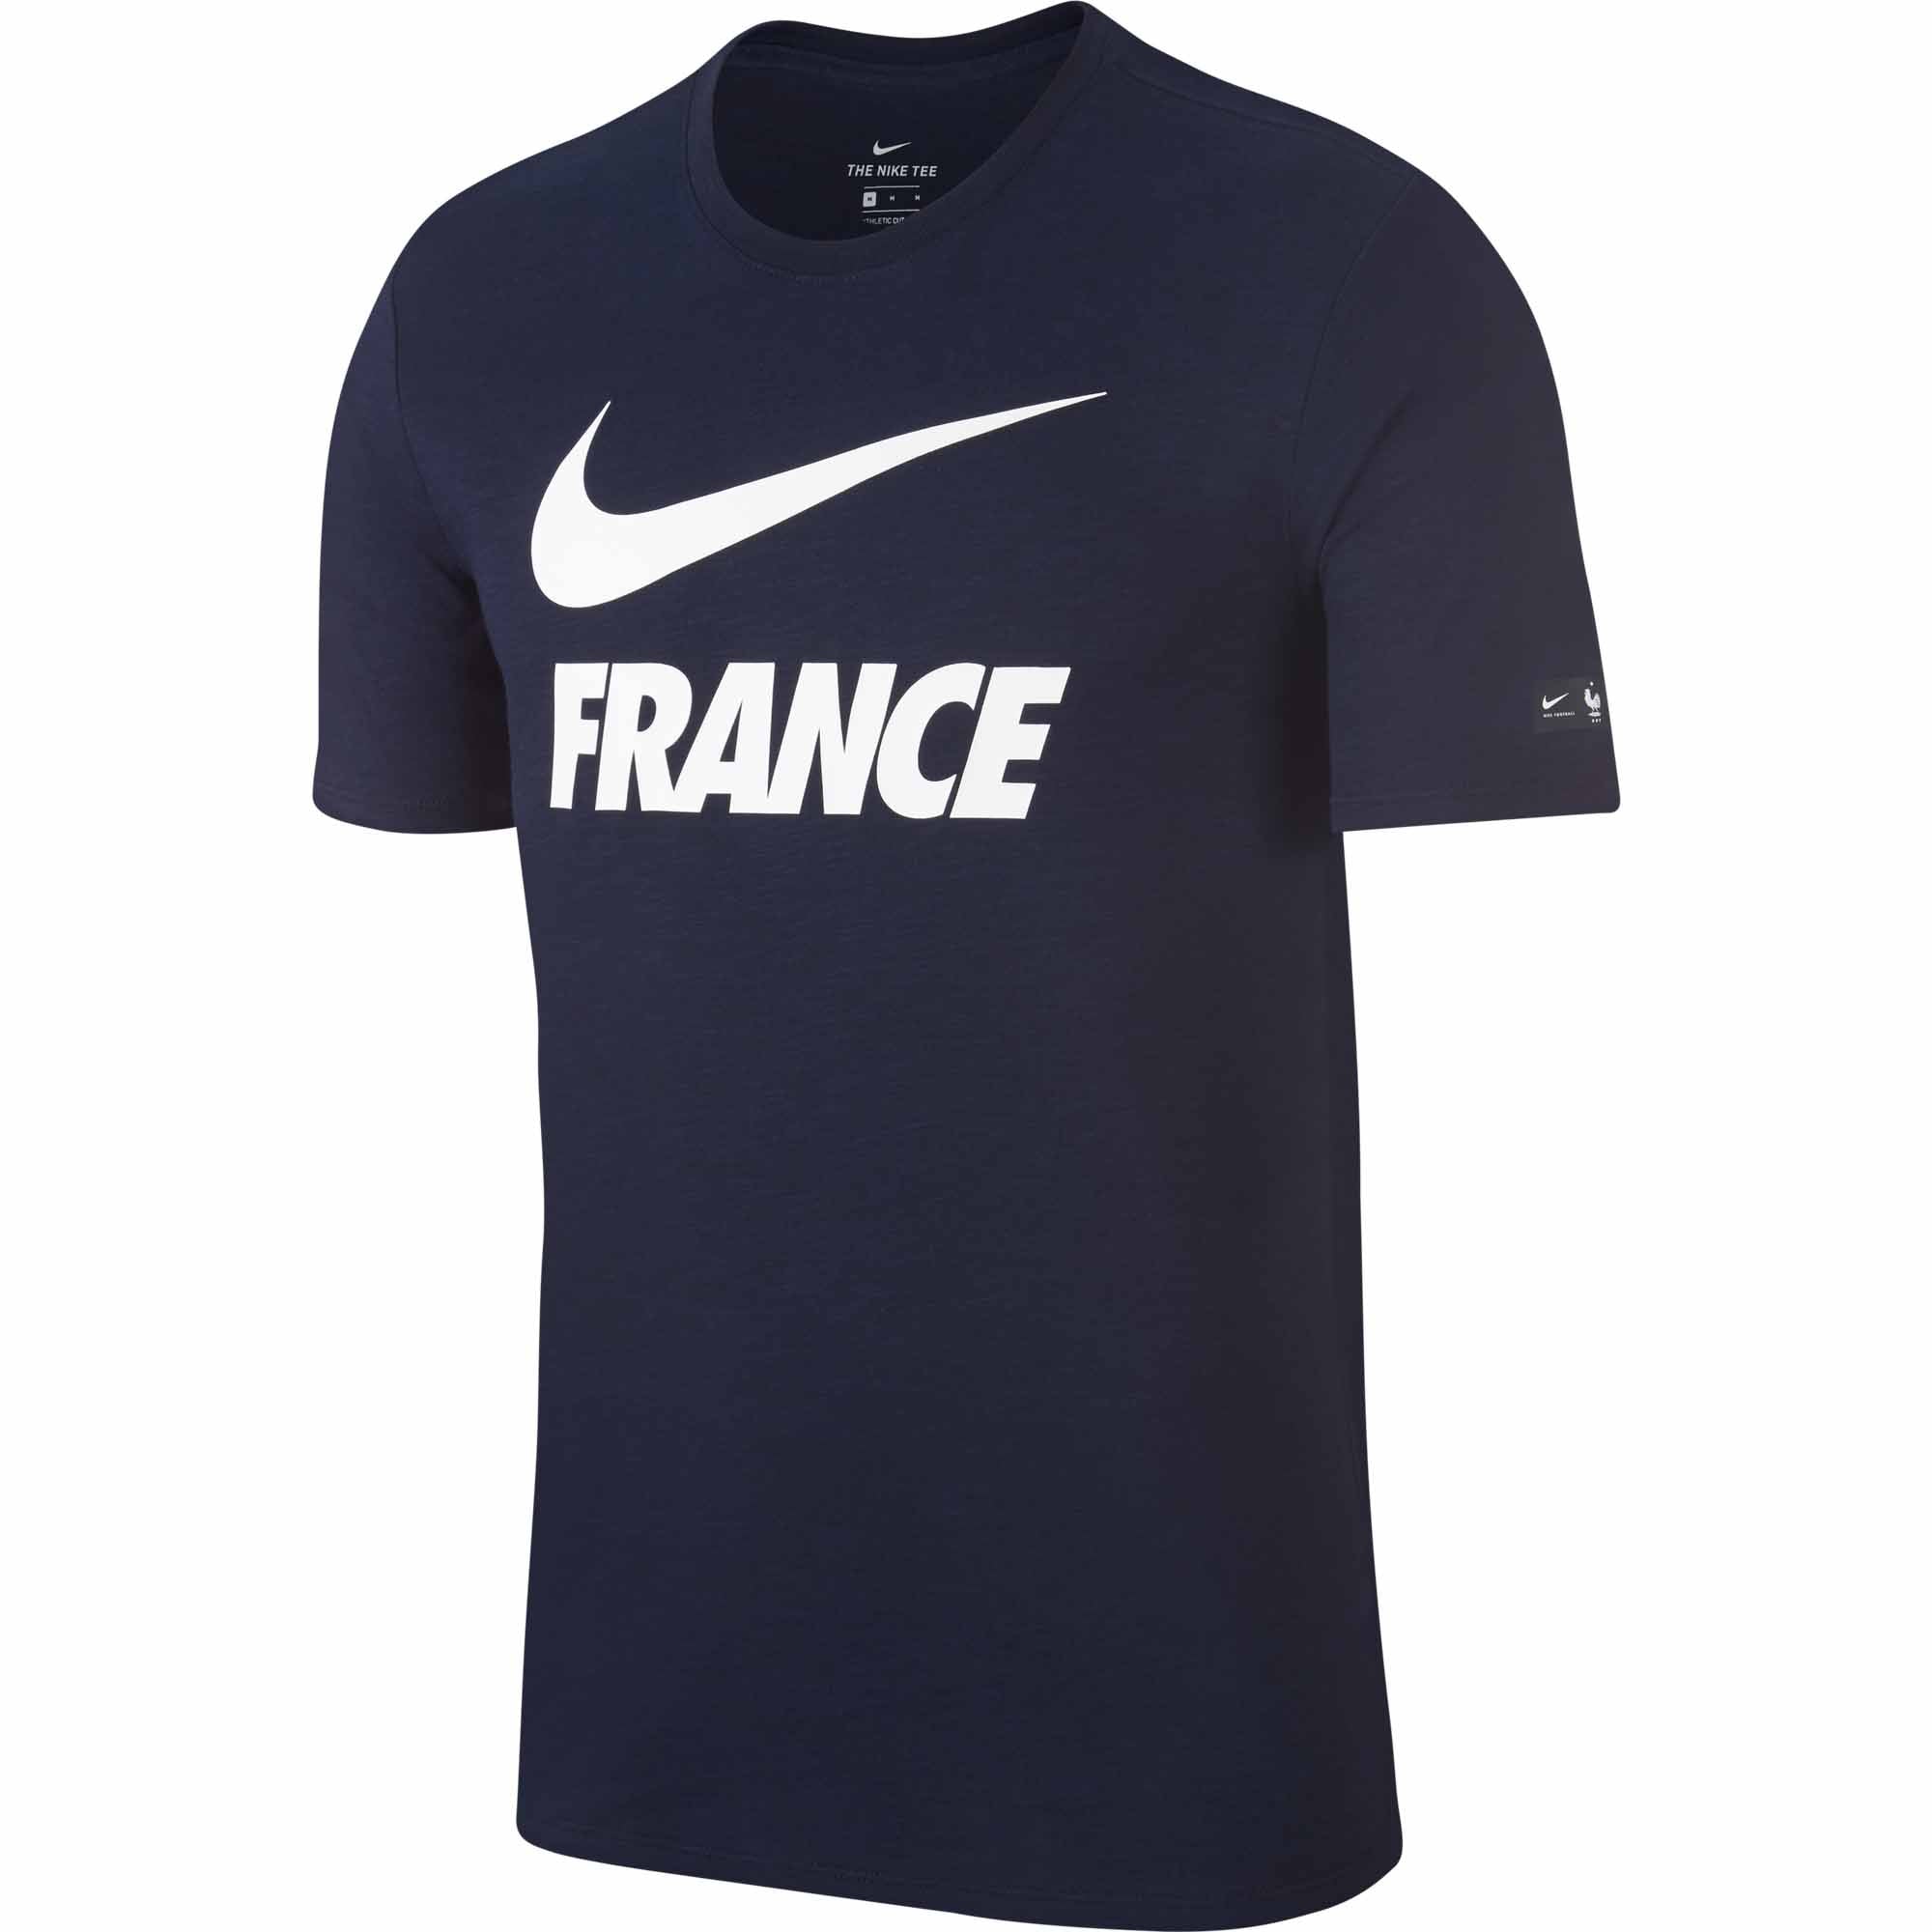 NIKE YOUTH DRY FRANCE T-SHIRT